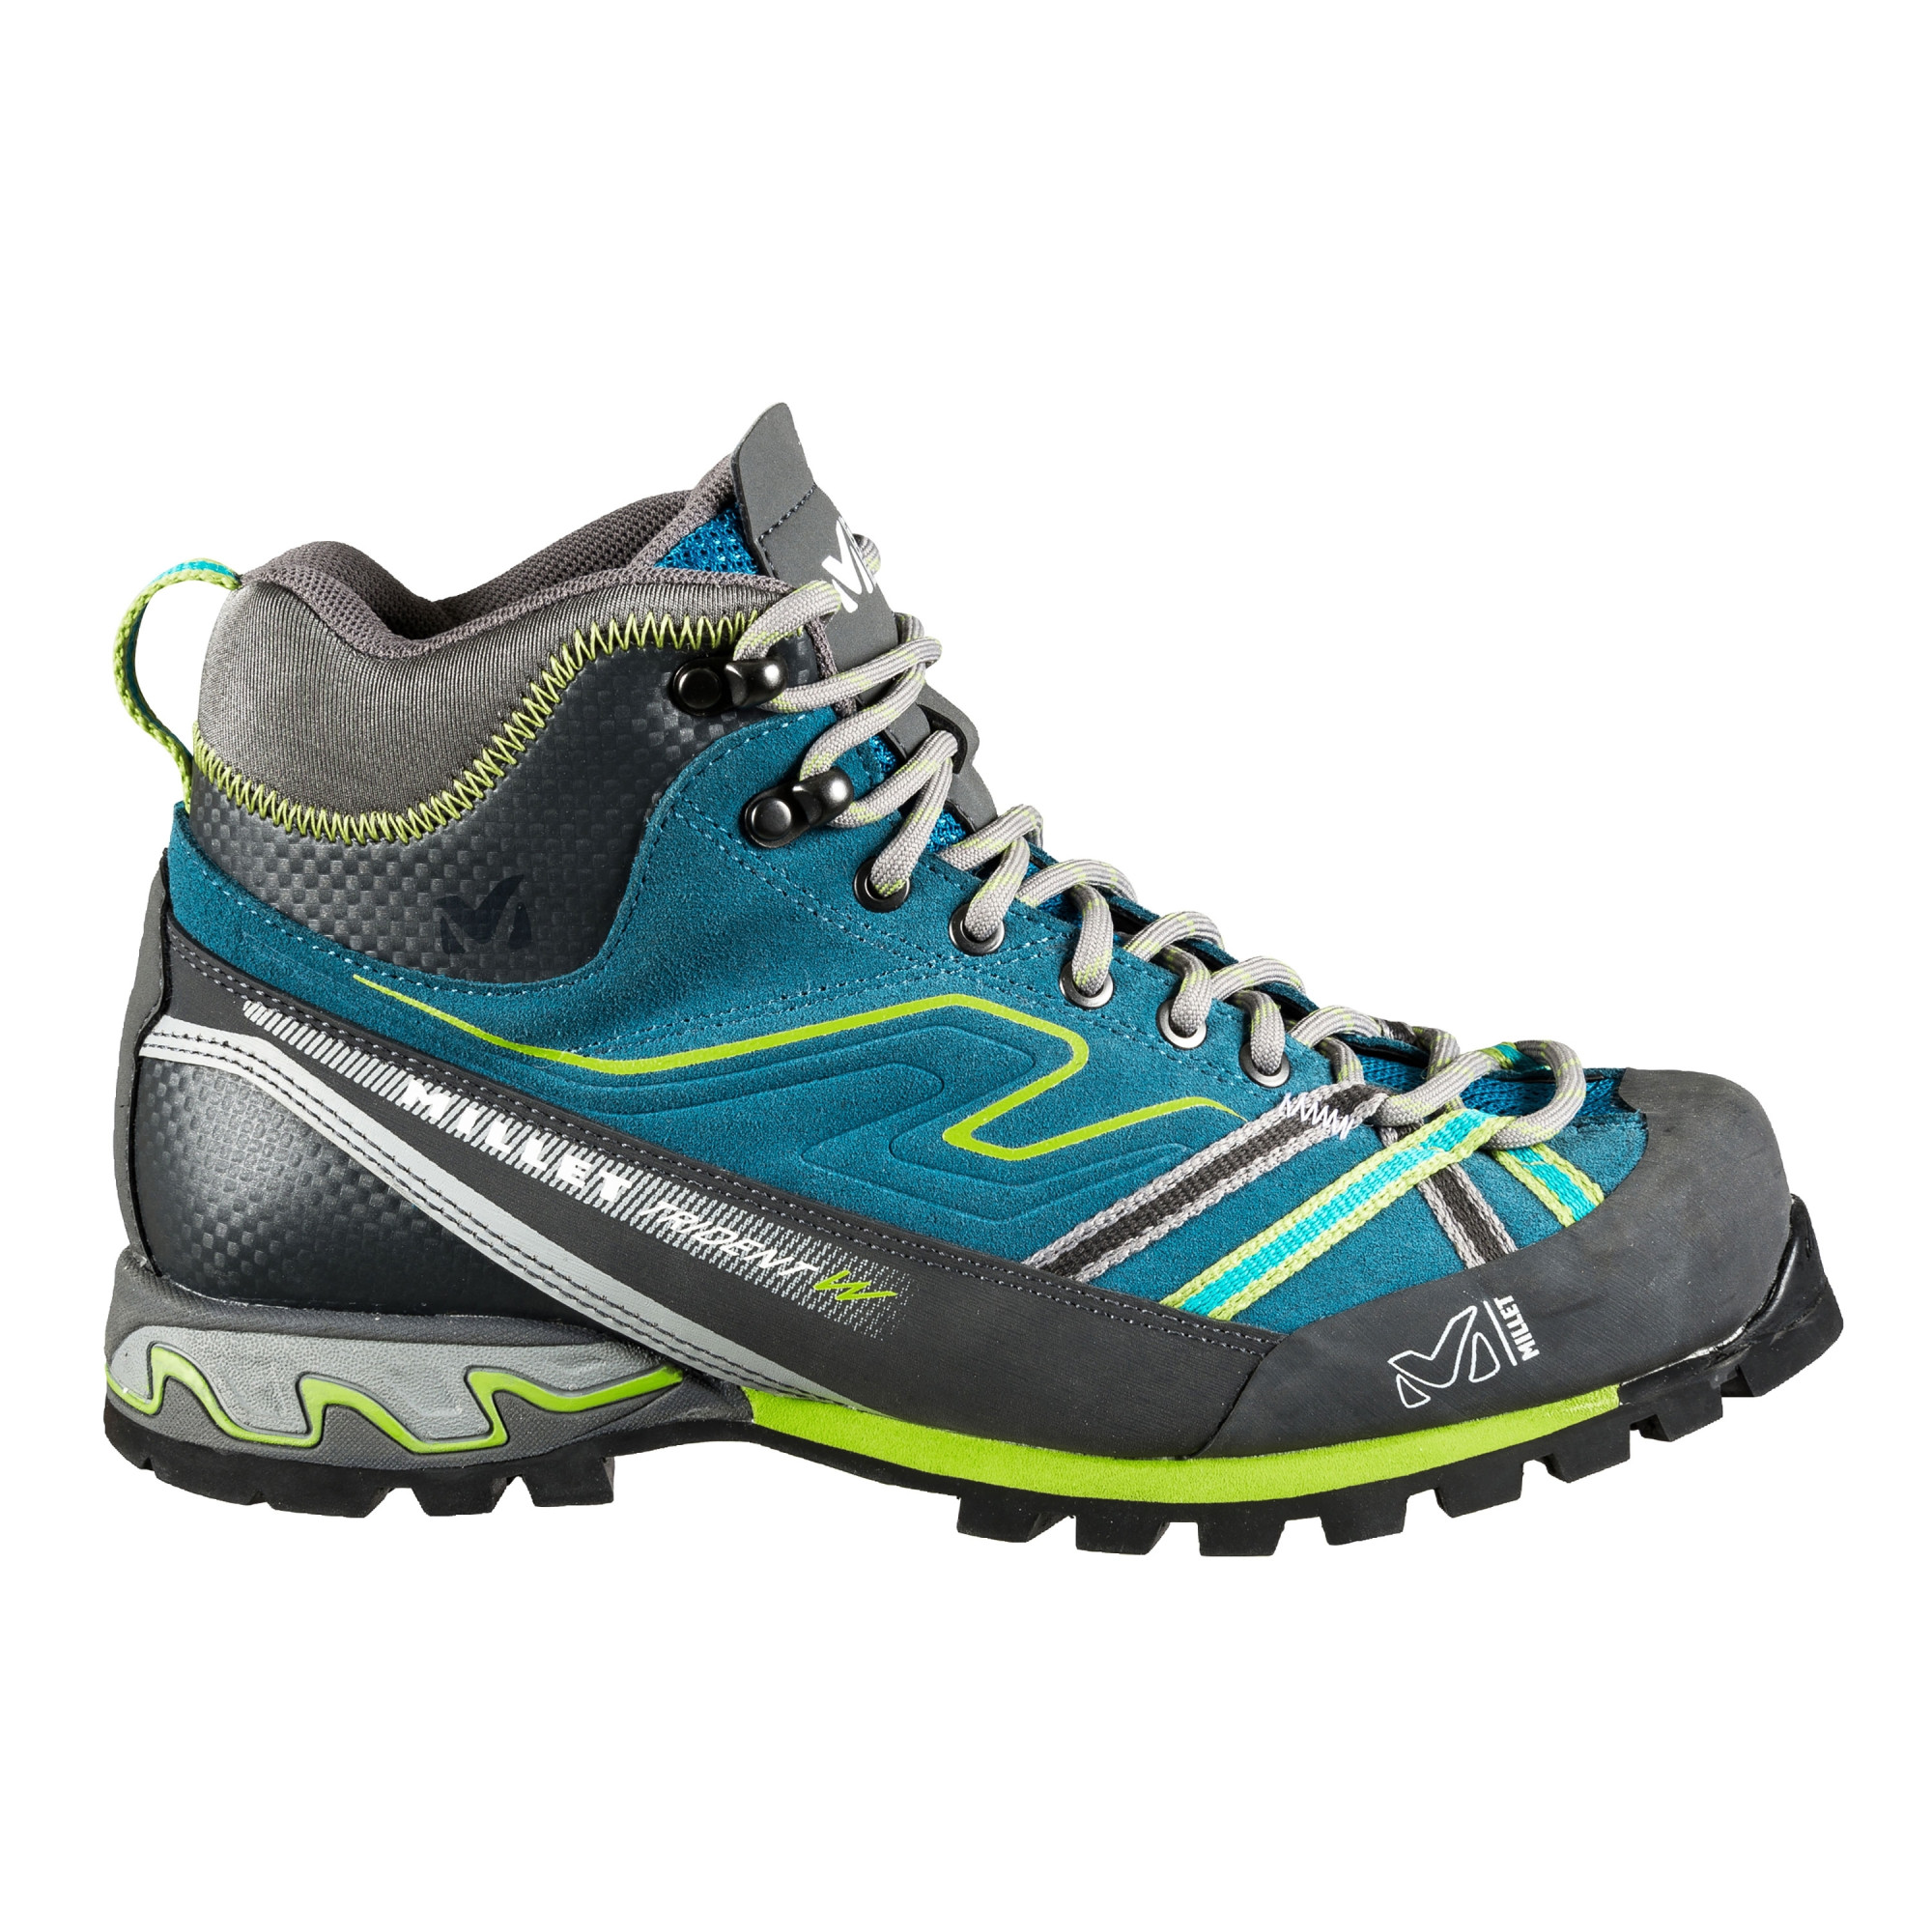 Millet Ld Super Trident Gtx Gore-tex Shoes Blue Women - Free Delivery!